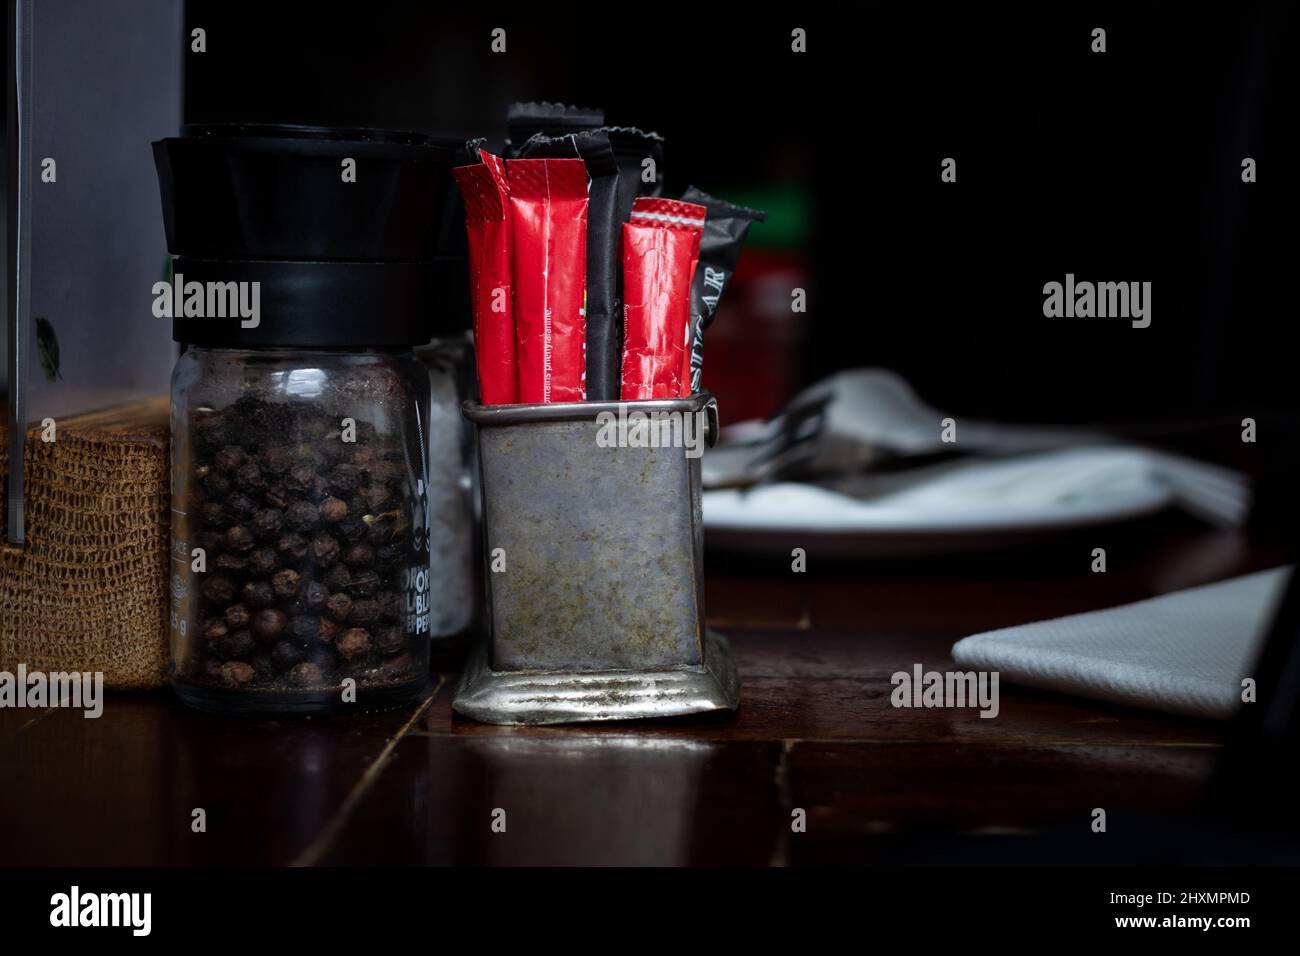 Rustic metal sugar sachet and sweetner container. Restaurant table with black pepper Stock Photo